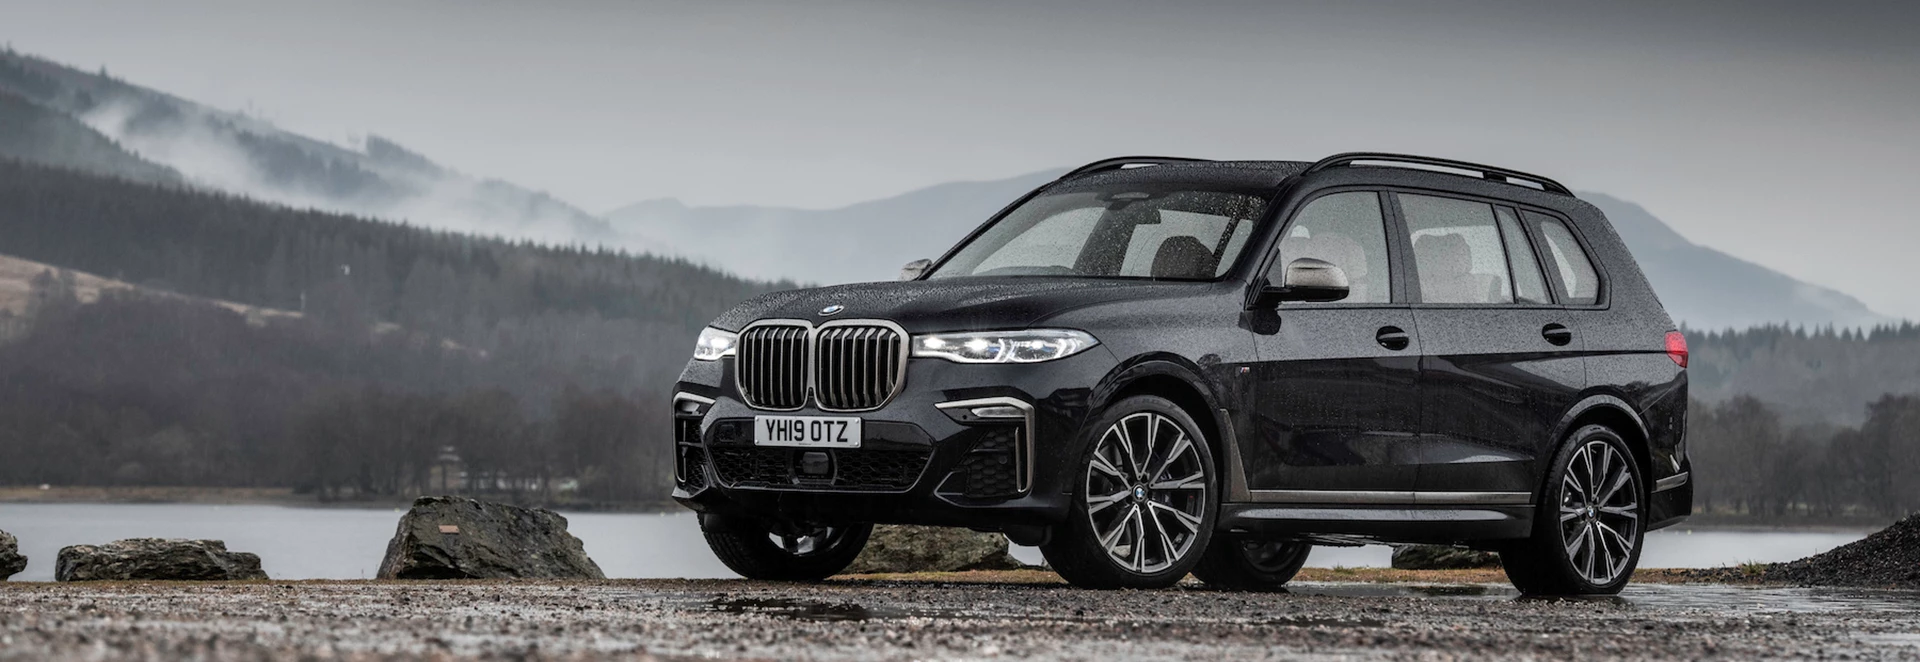 Could an all-new BMW X8 M be on the way? 